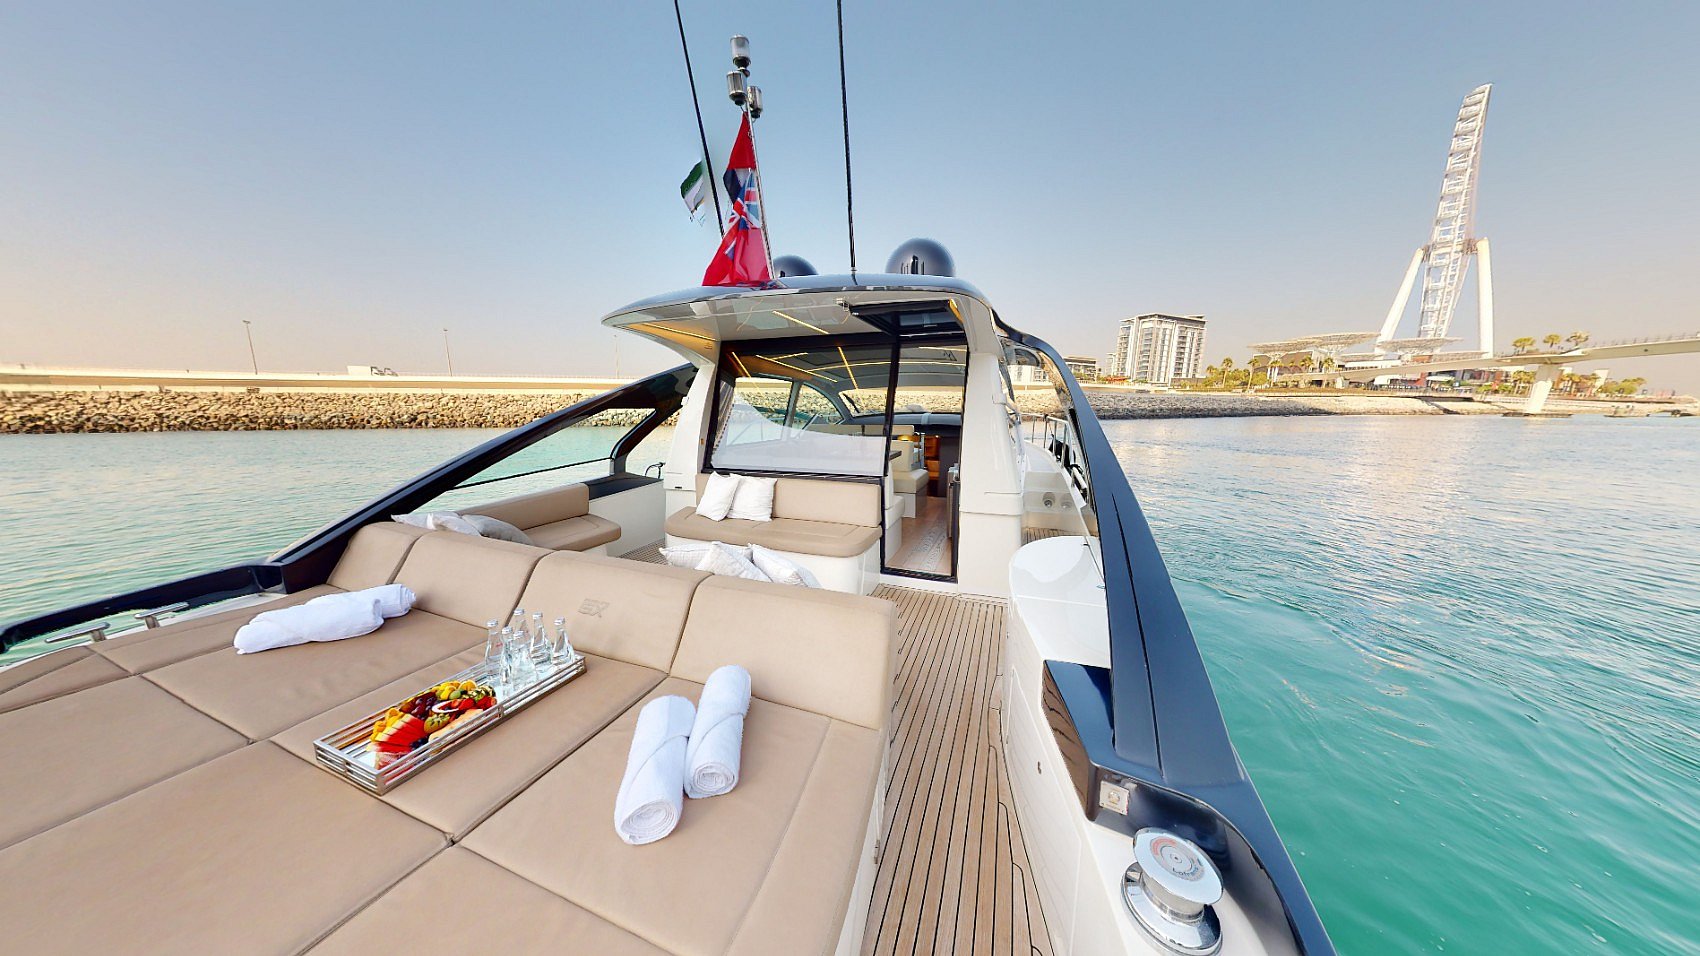 Pershing 5X Pearl White 52 ft in Dubai Harbour for rent in Dubai